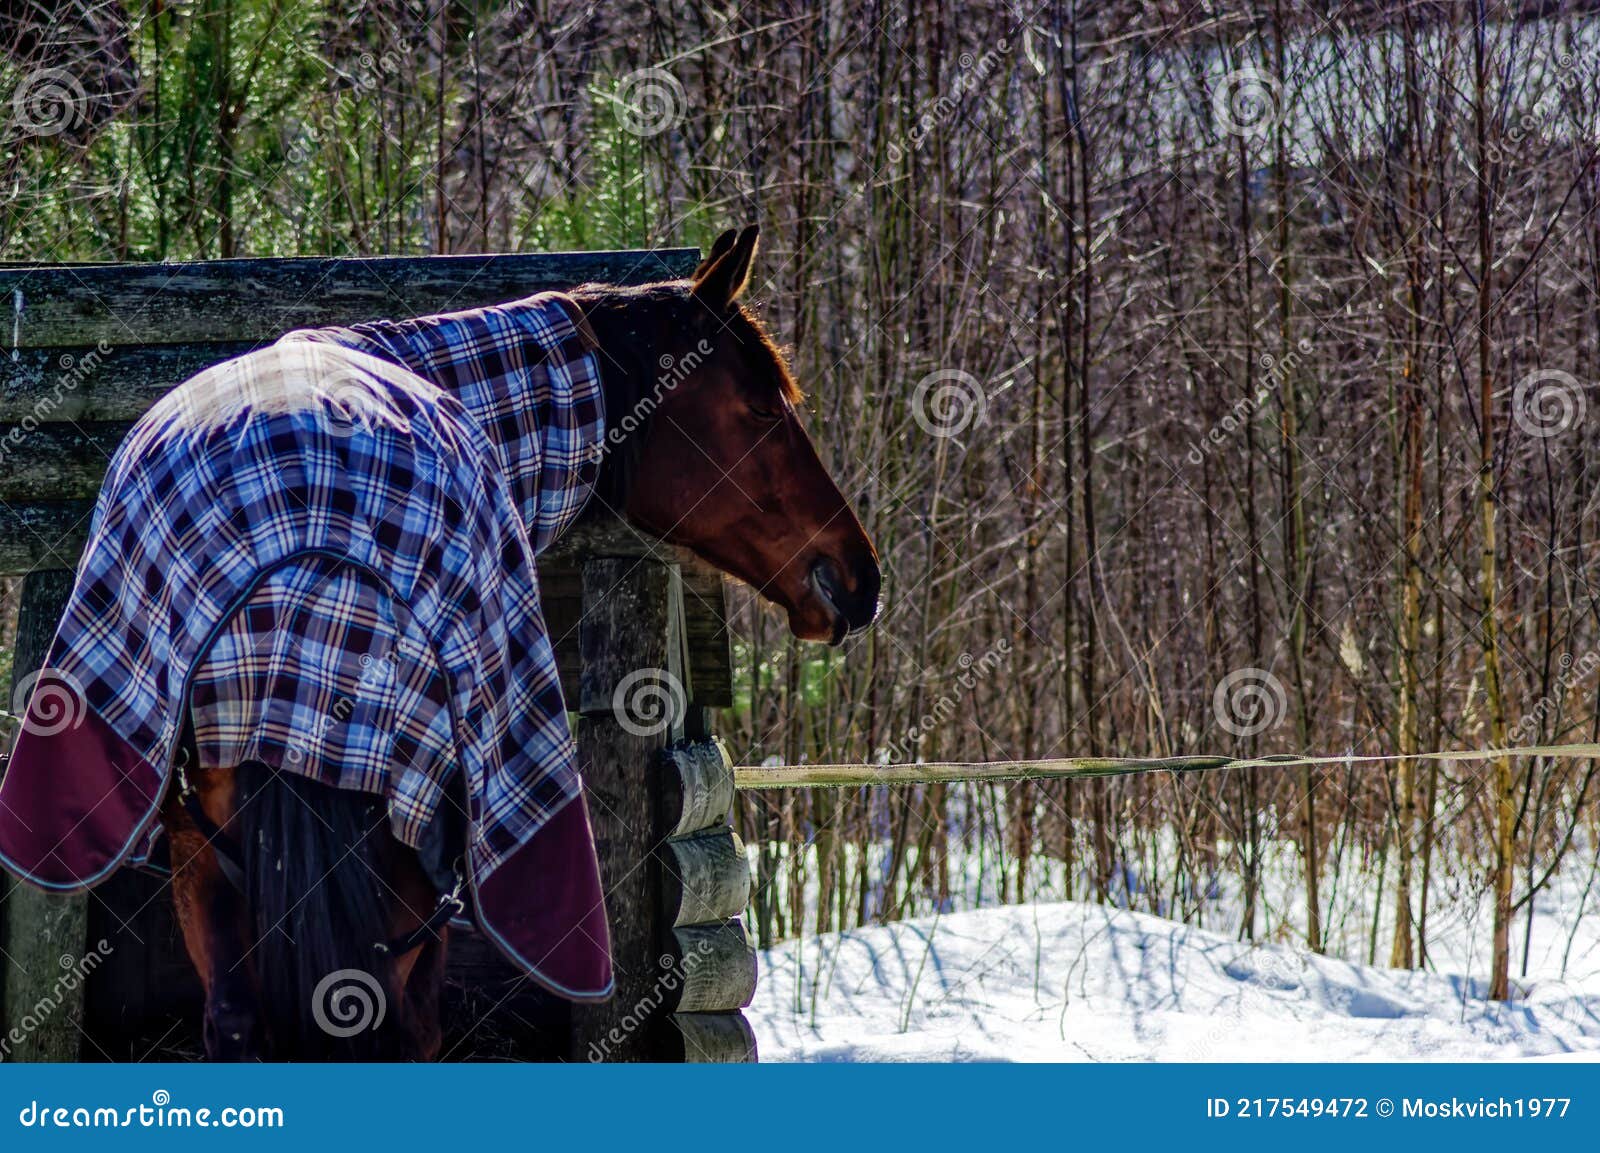 horse with a s culpa in the open pasture